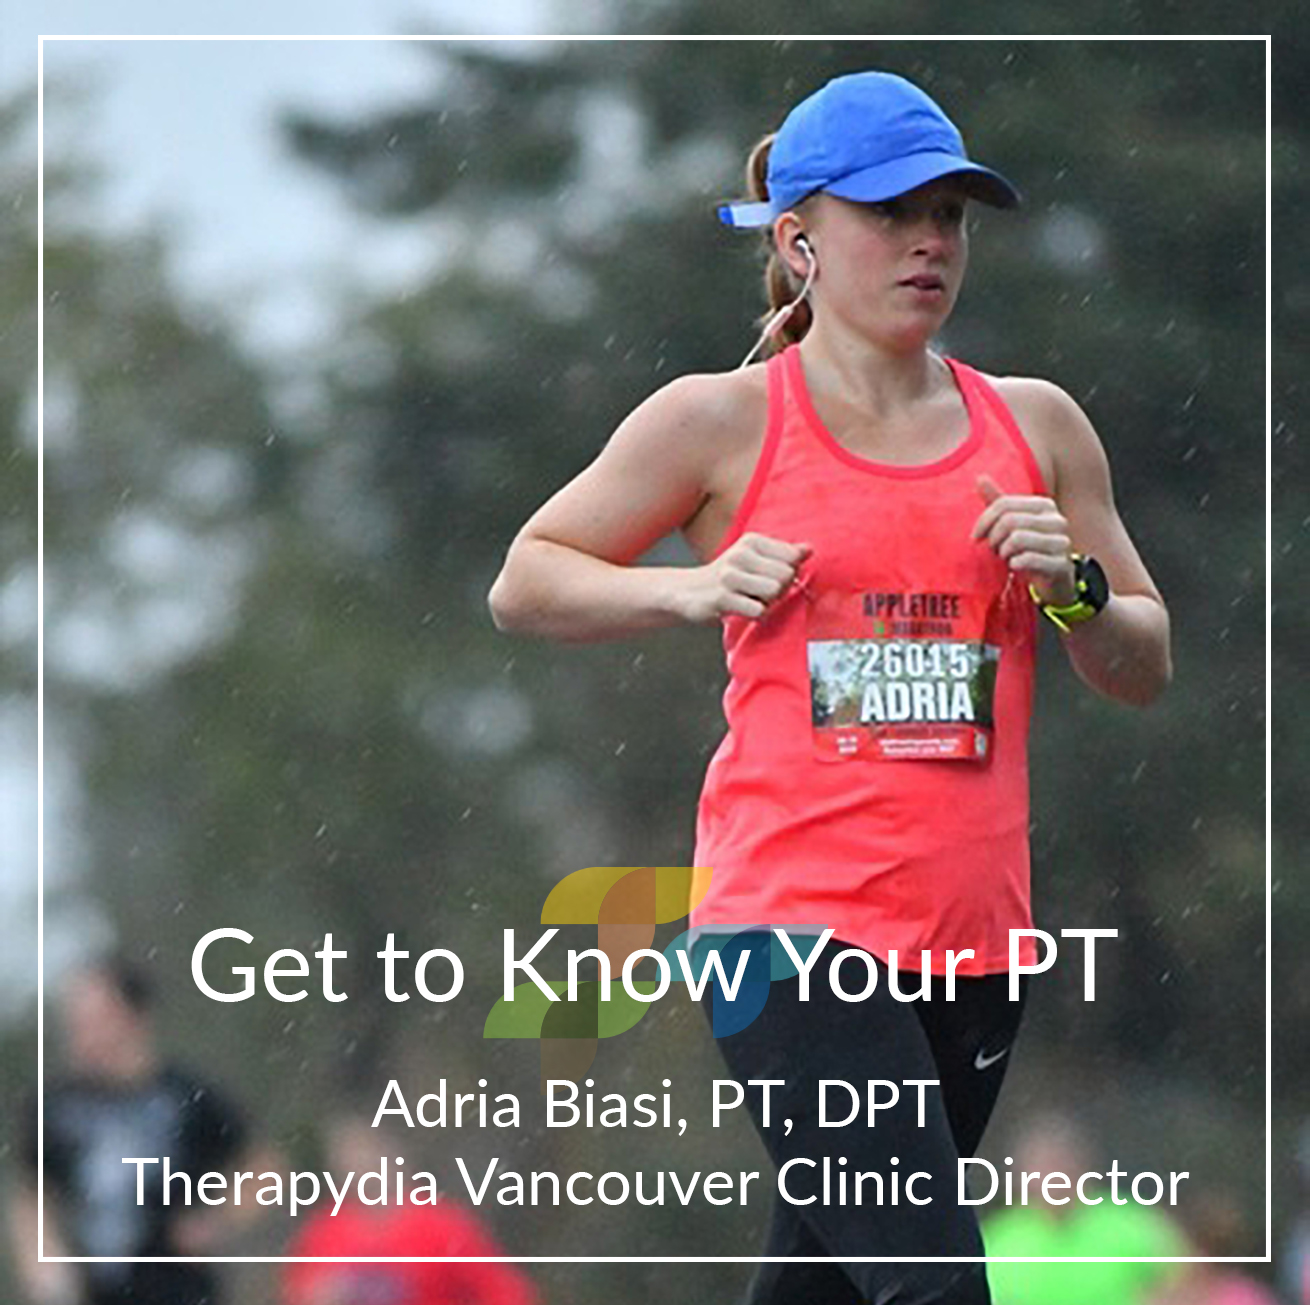 Get to Know Your PT – Adria Biasi, Therapydia Vancouver